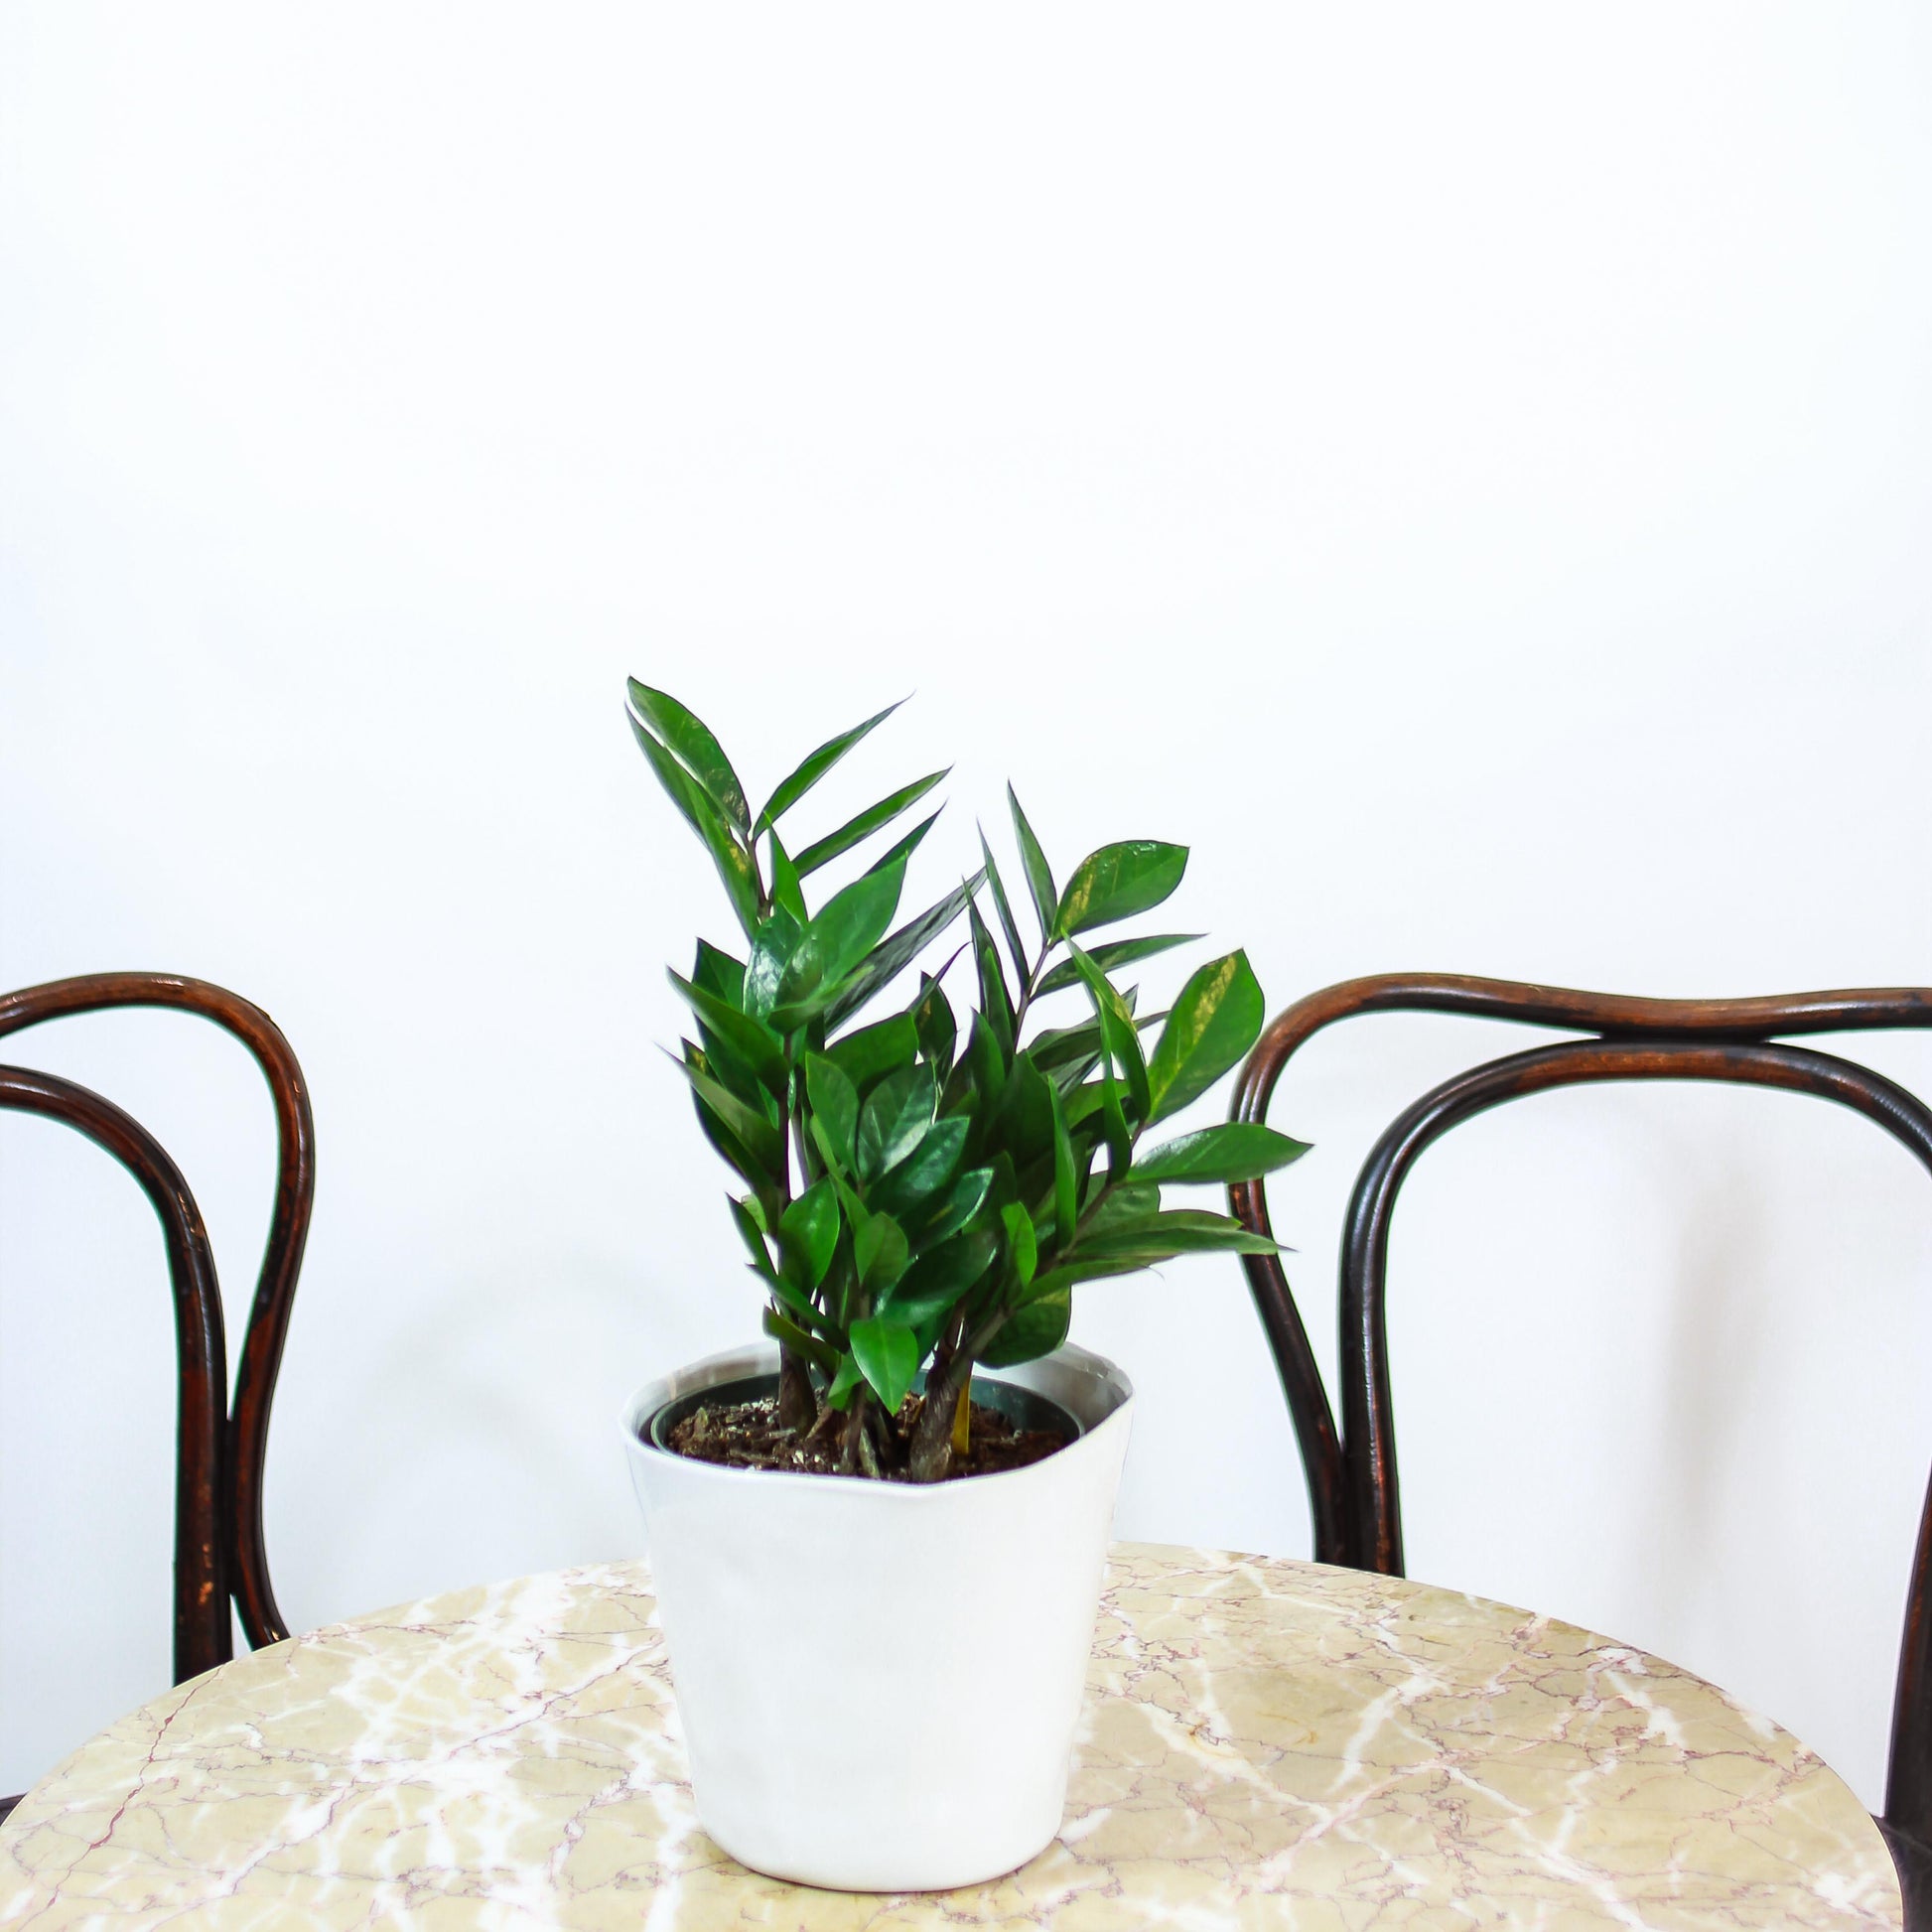 ZZ Plant (Zamioculcas zamiifolia) in a 6 inch pot. Indoor plant for sale by Promise Supply for delivery and pickup in Toronto